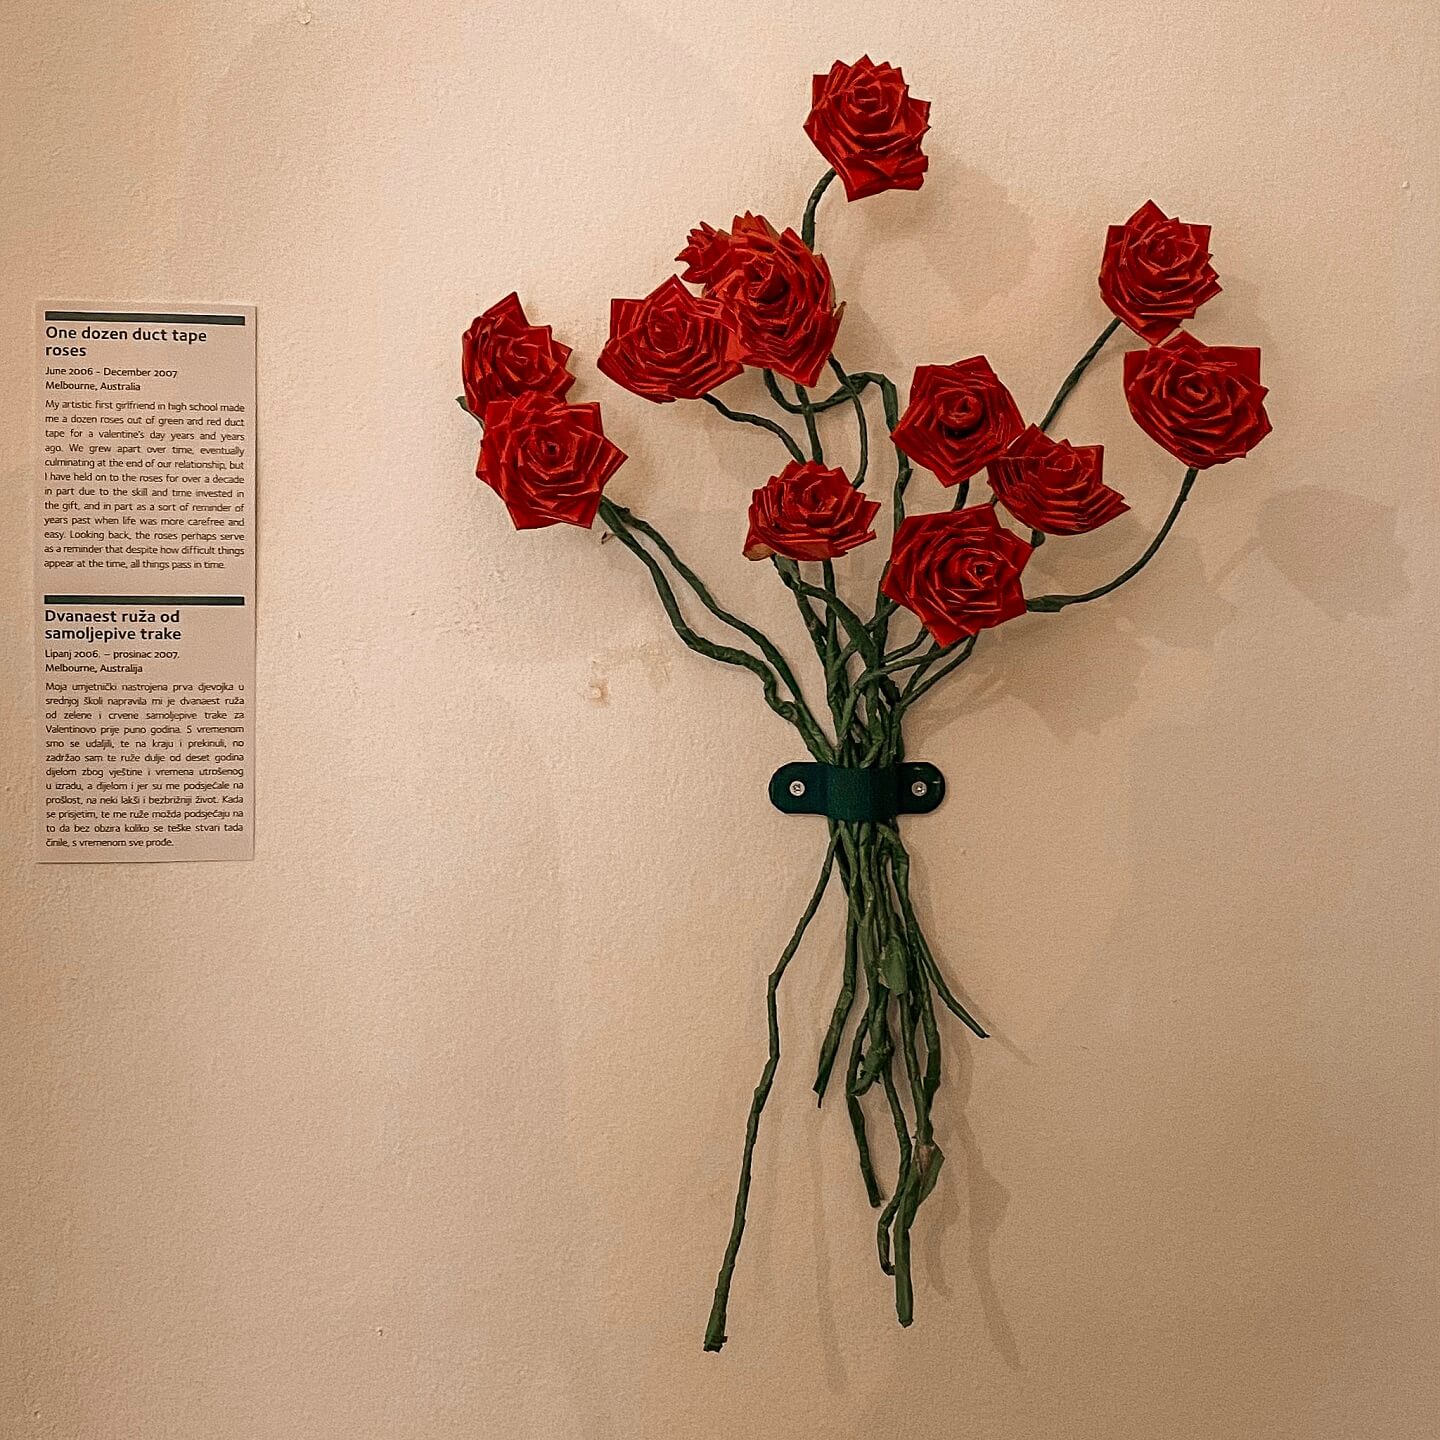 Roses from Museum of Broken Relationships